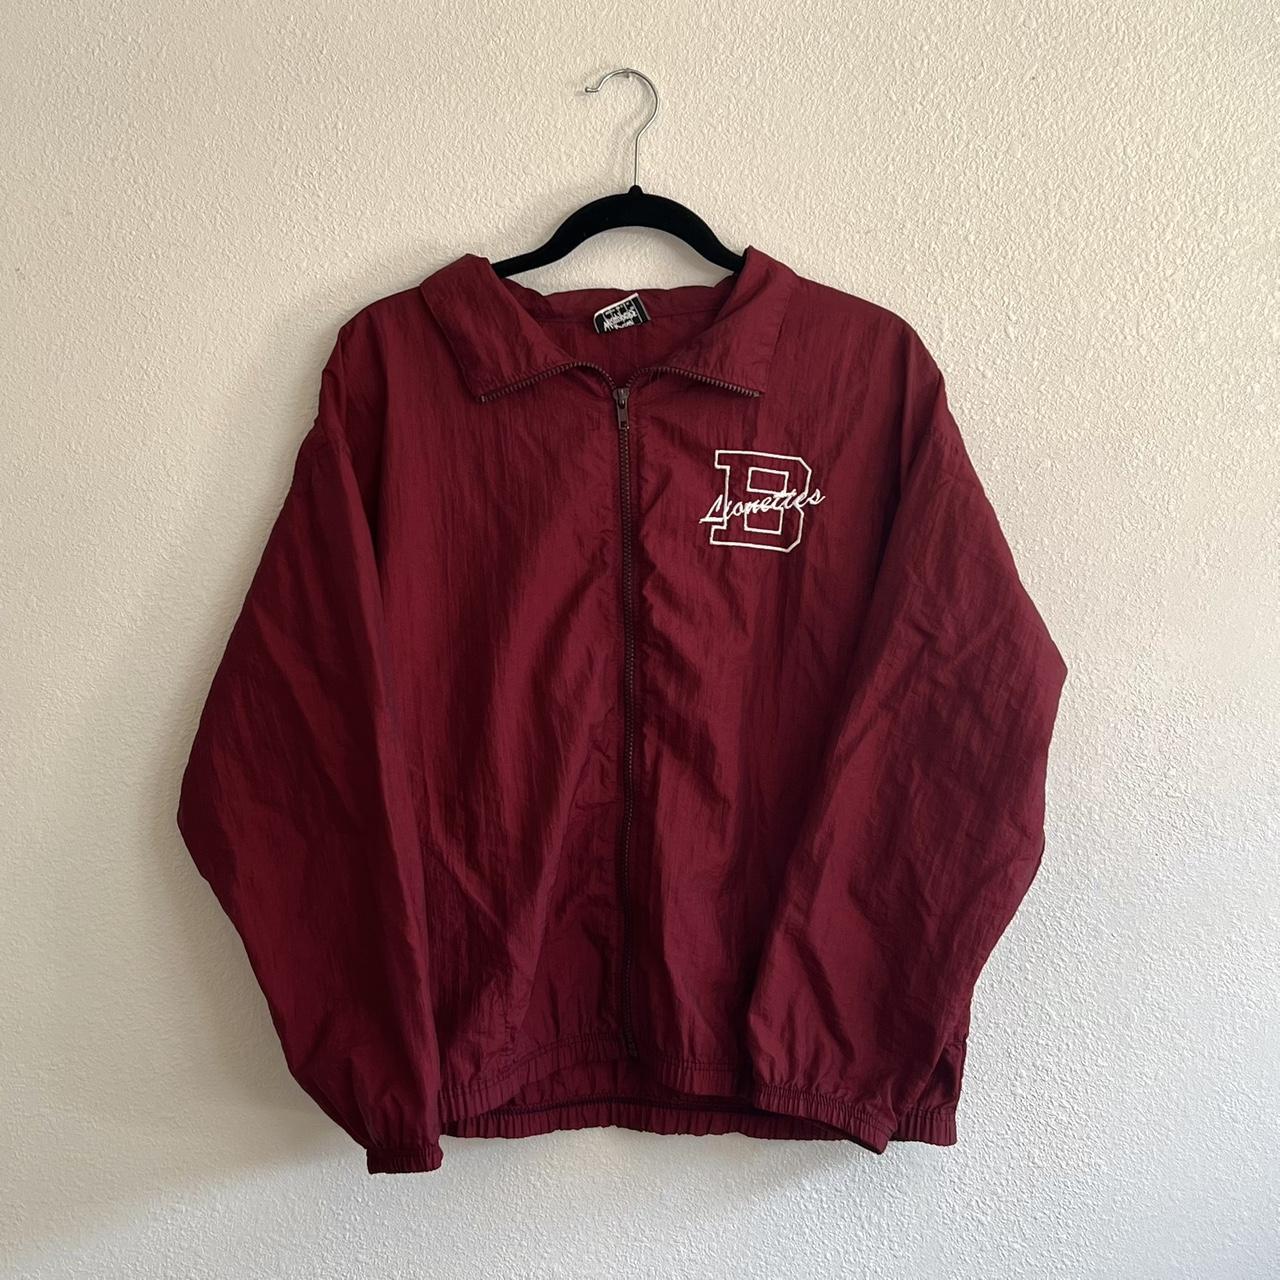 Product Image 3 - Vintage Maroon Windbreaker

Bought this at